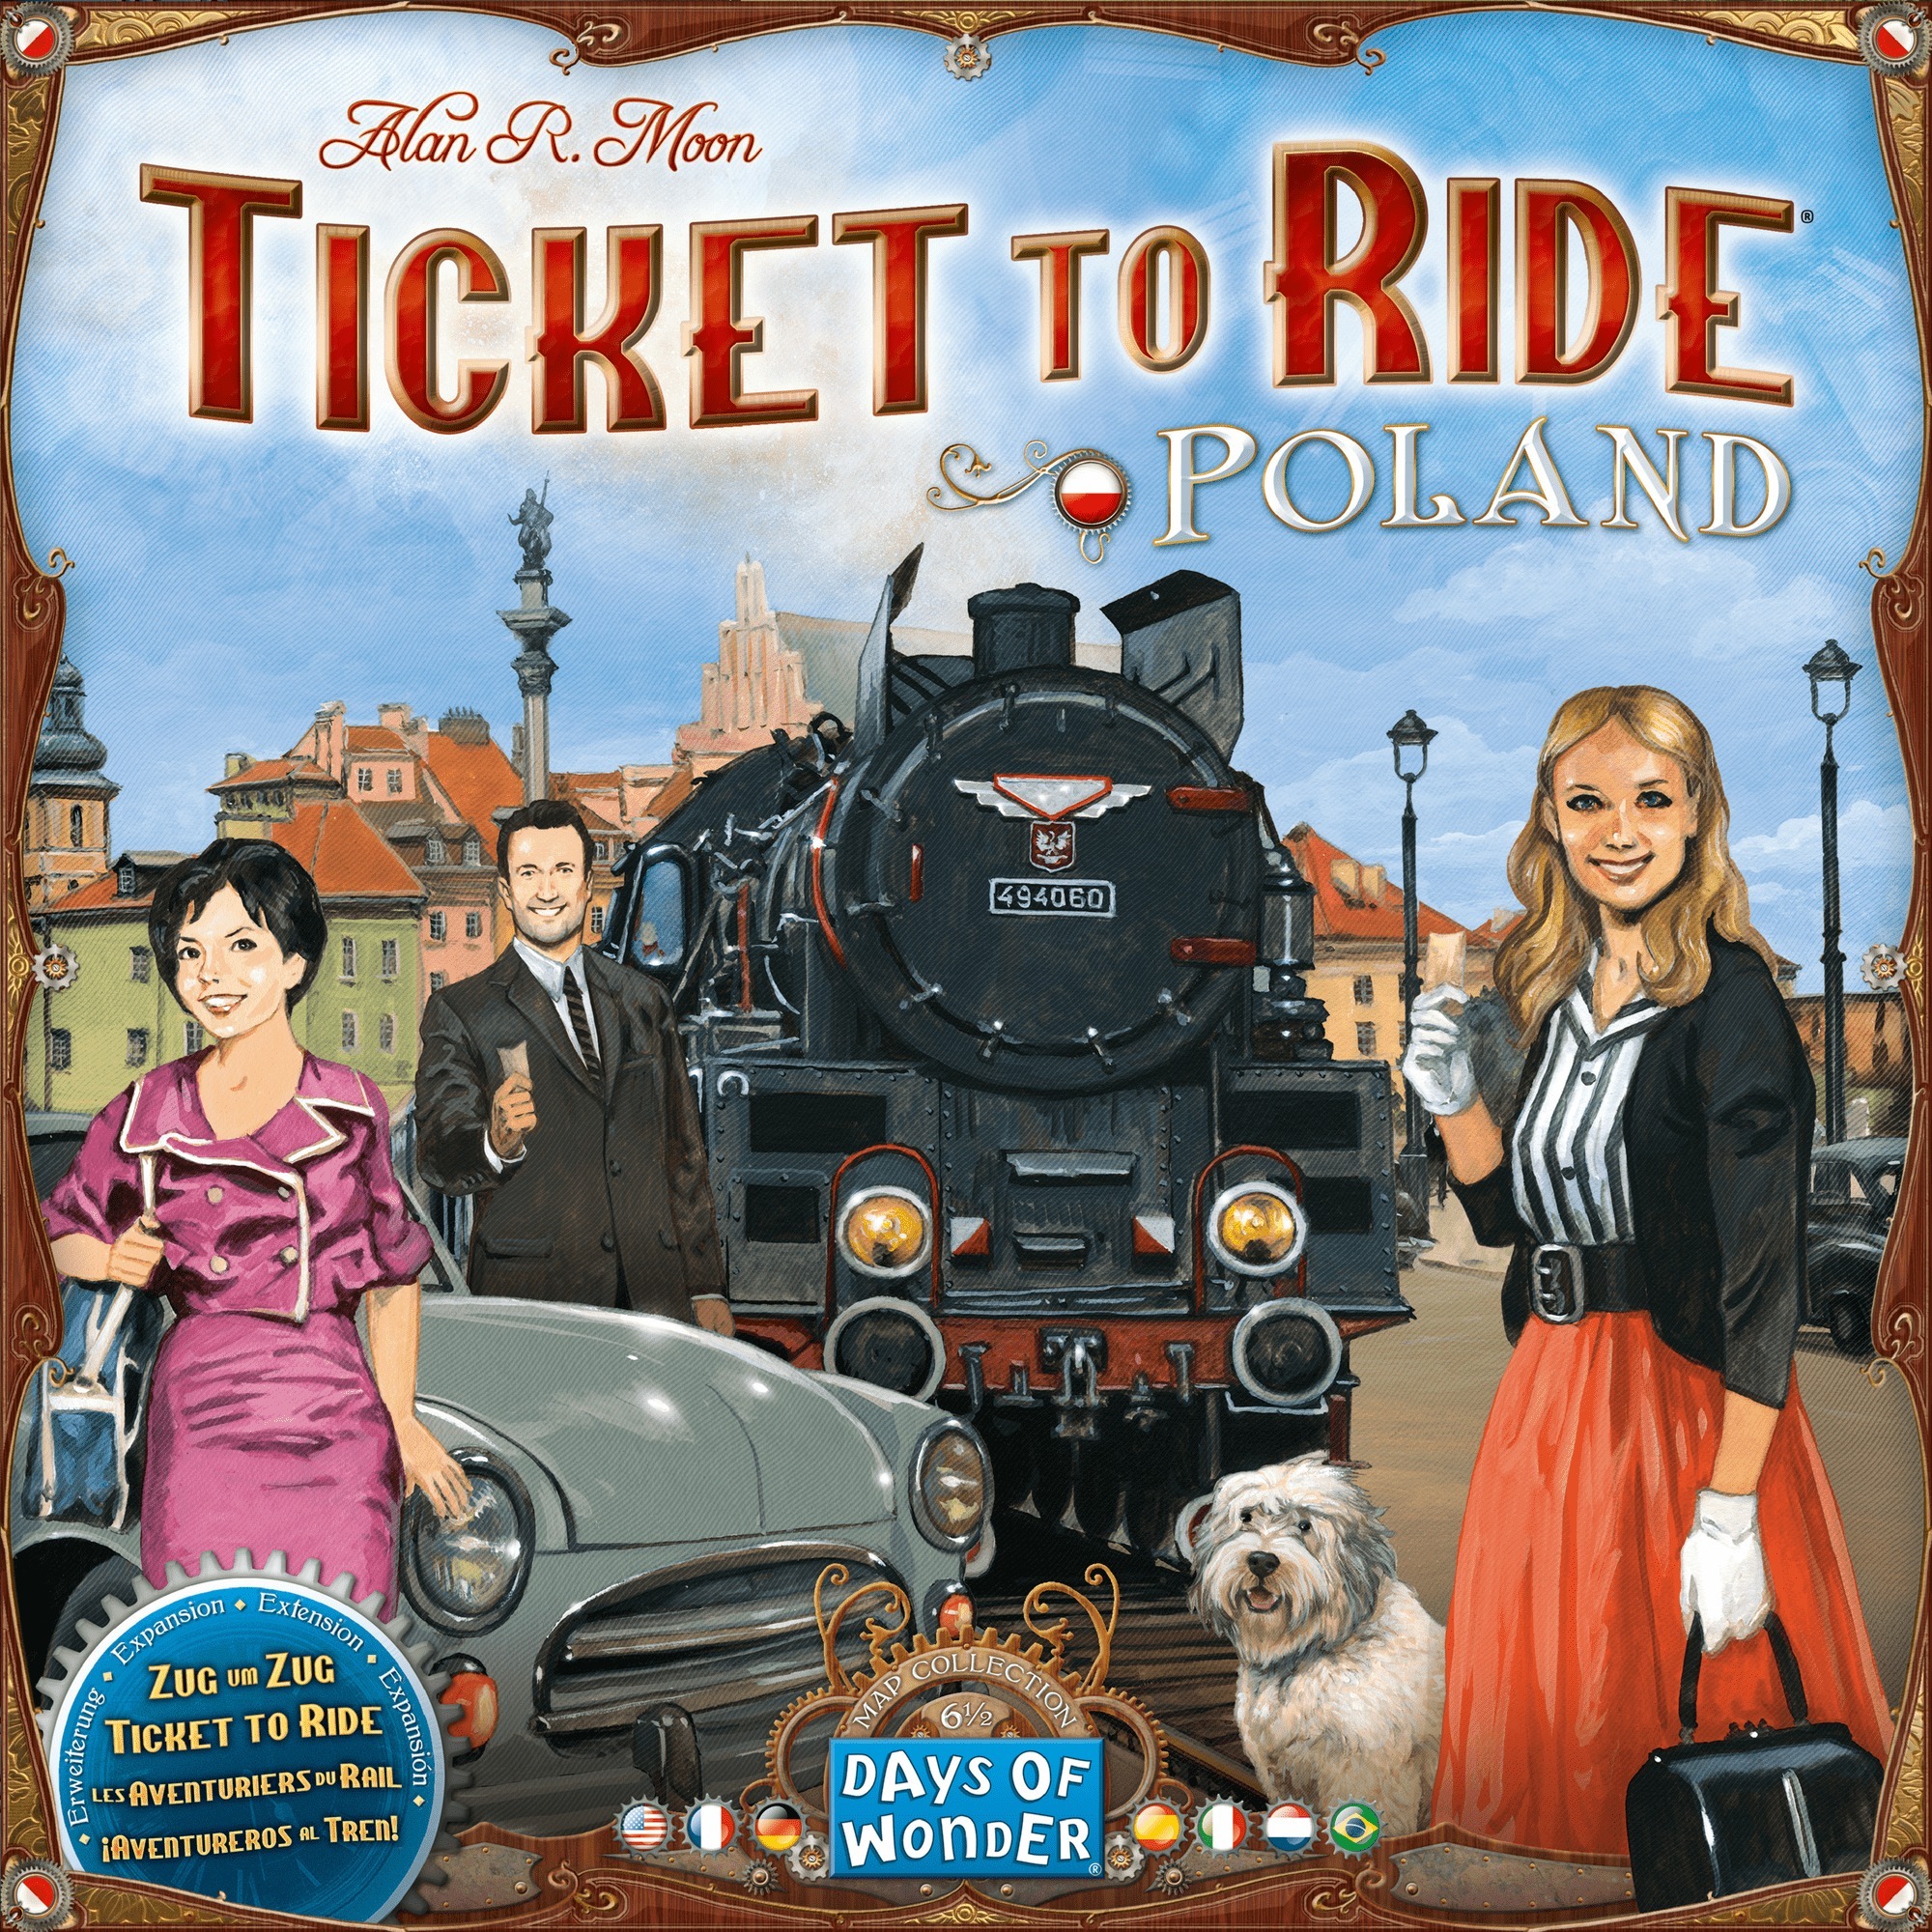 Steam or ticket to ride фото 21